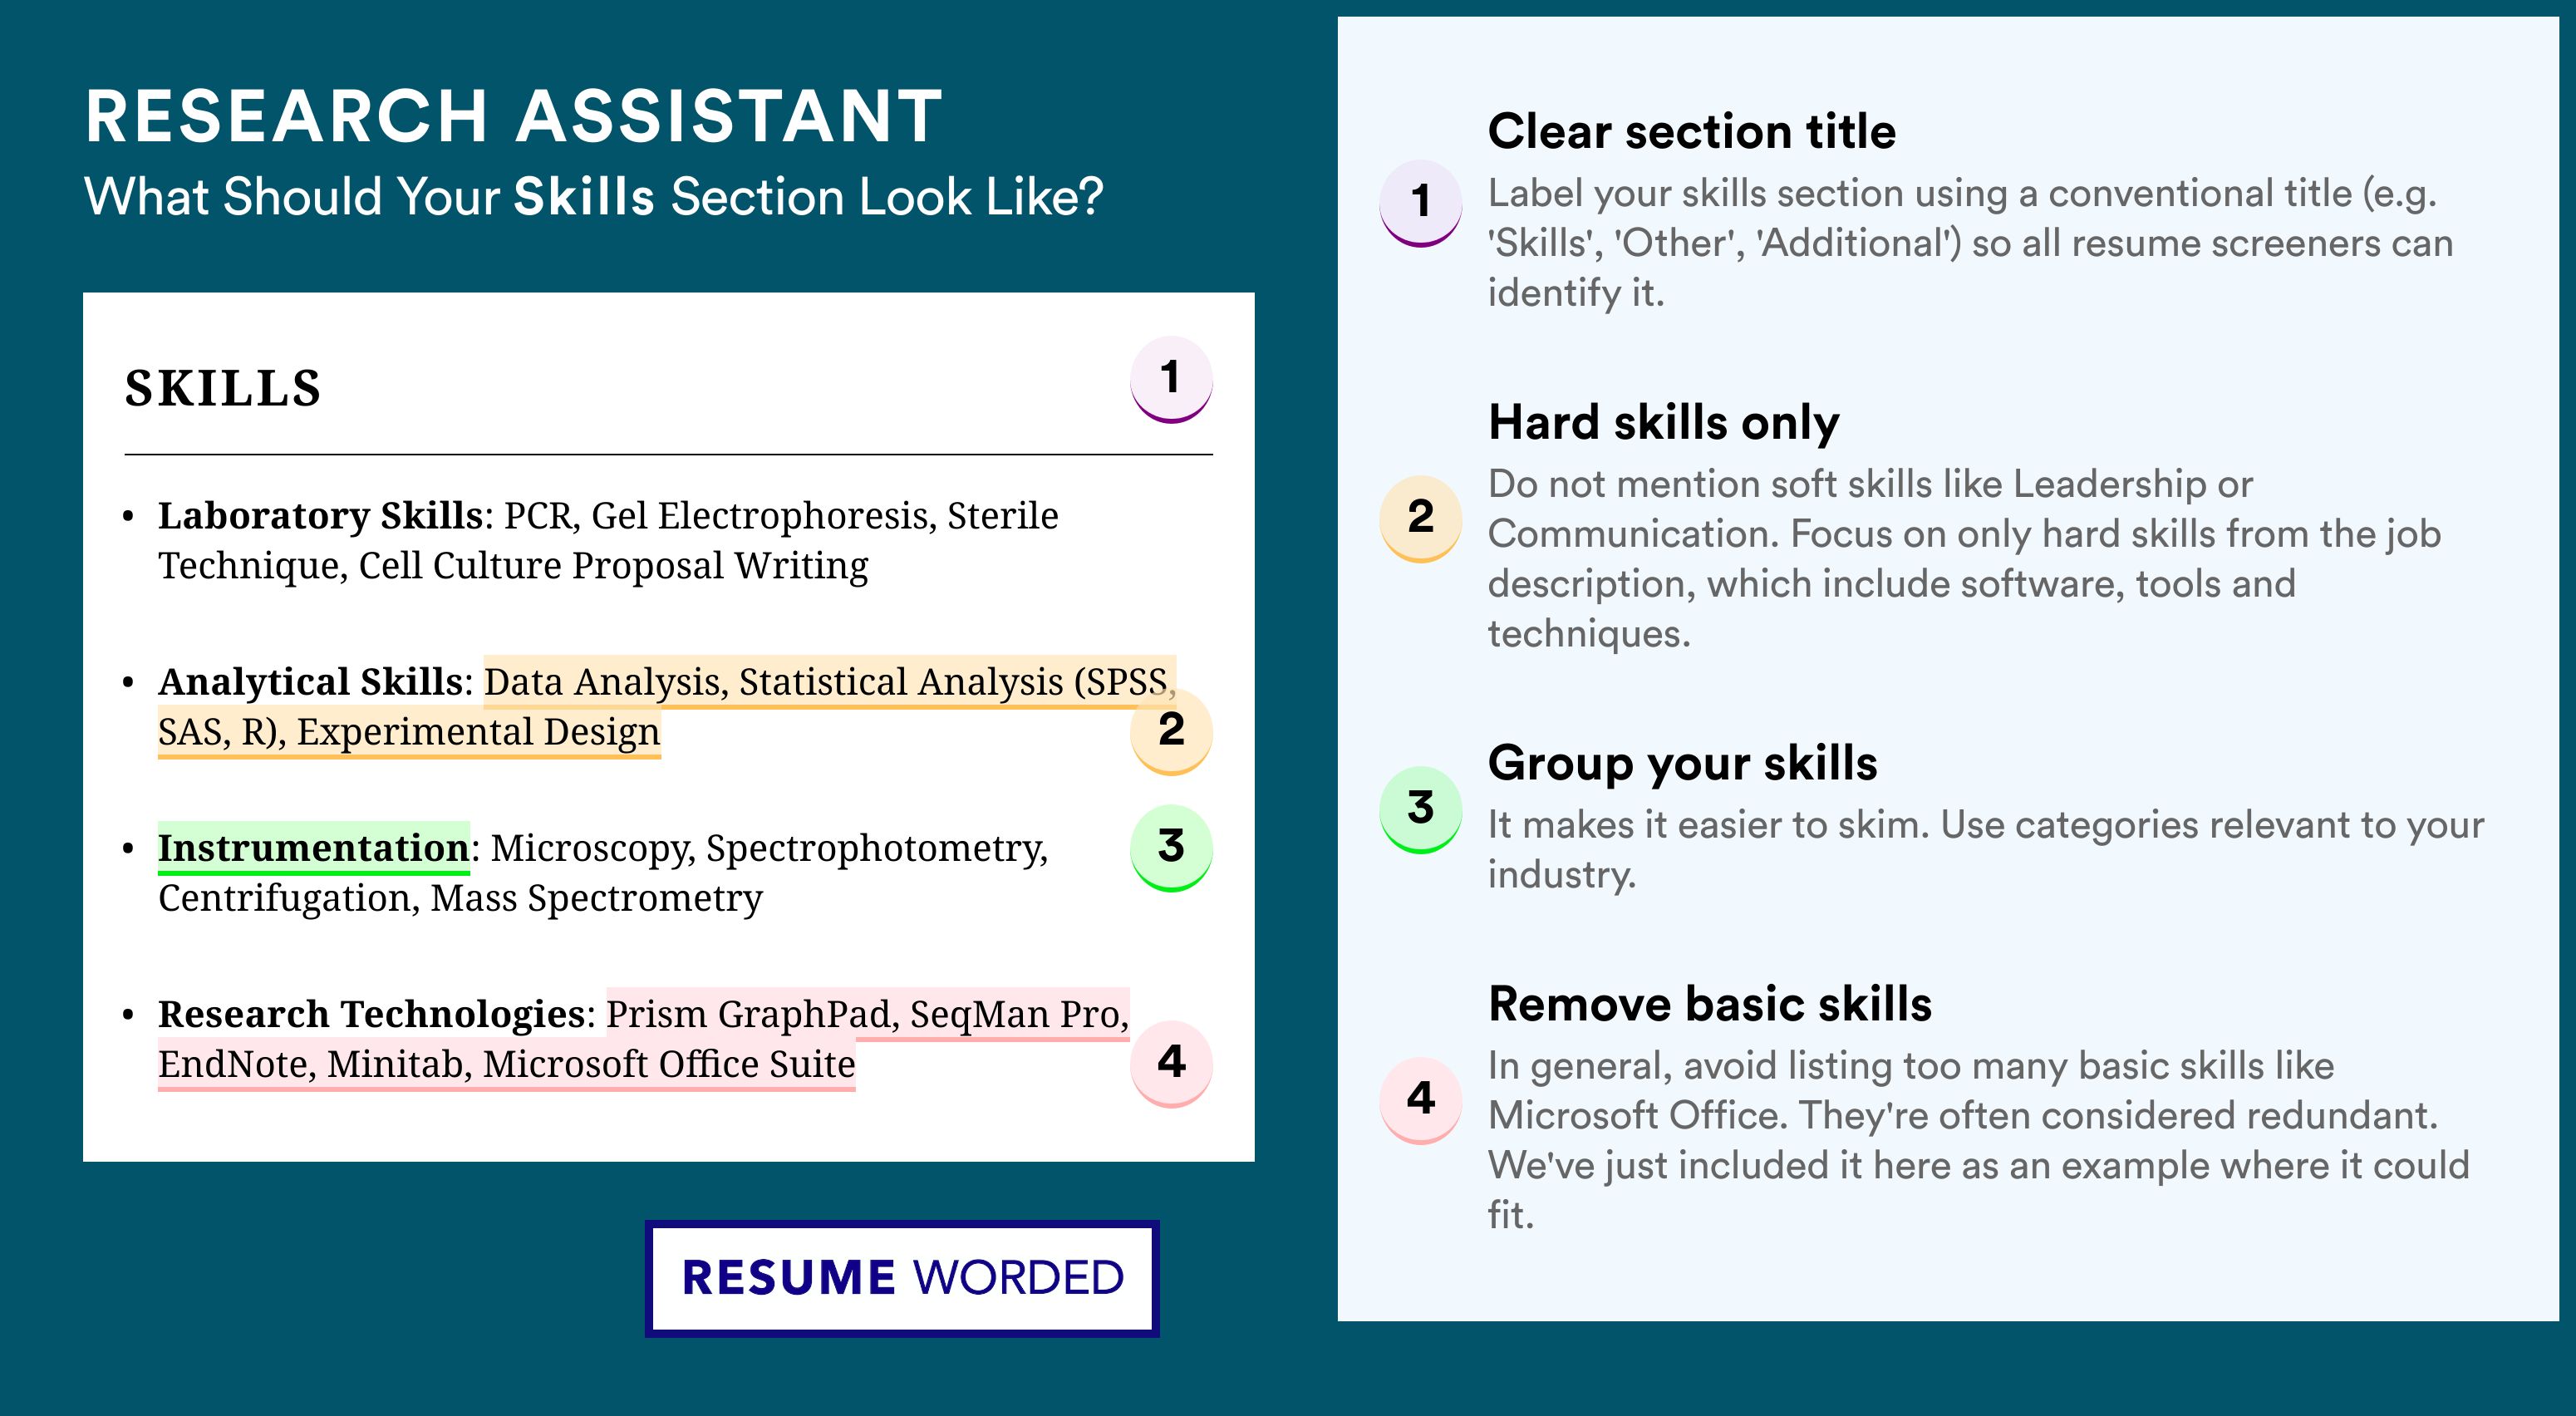 How To Write Your Skills Section - Research Assistant Roles